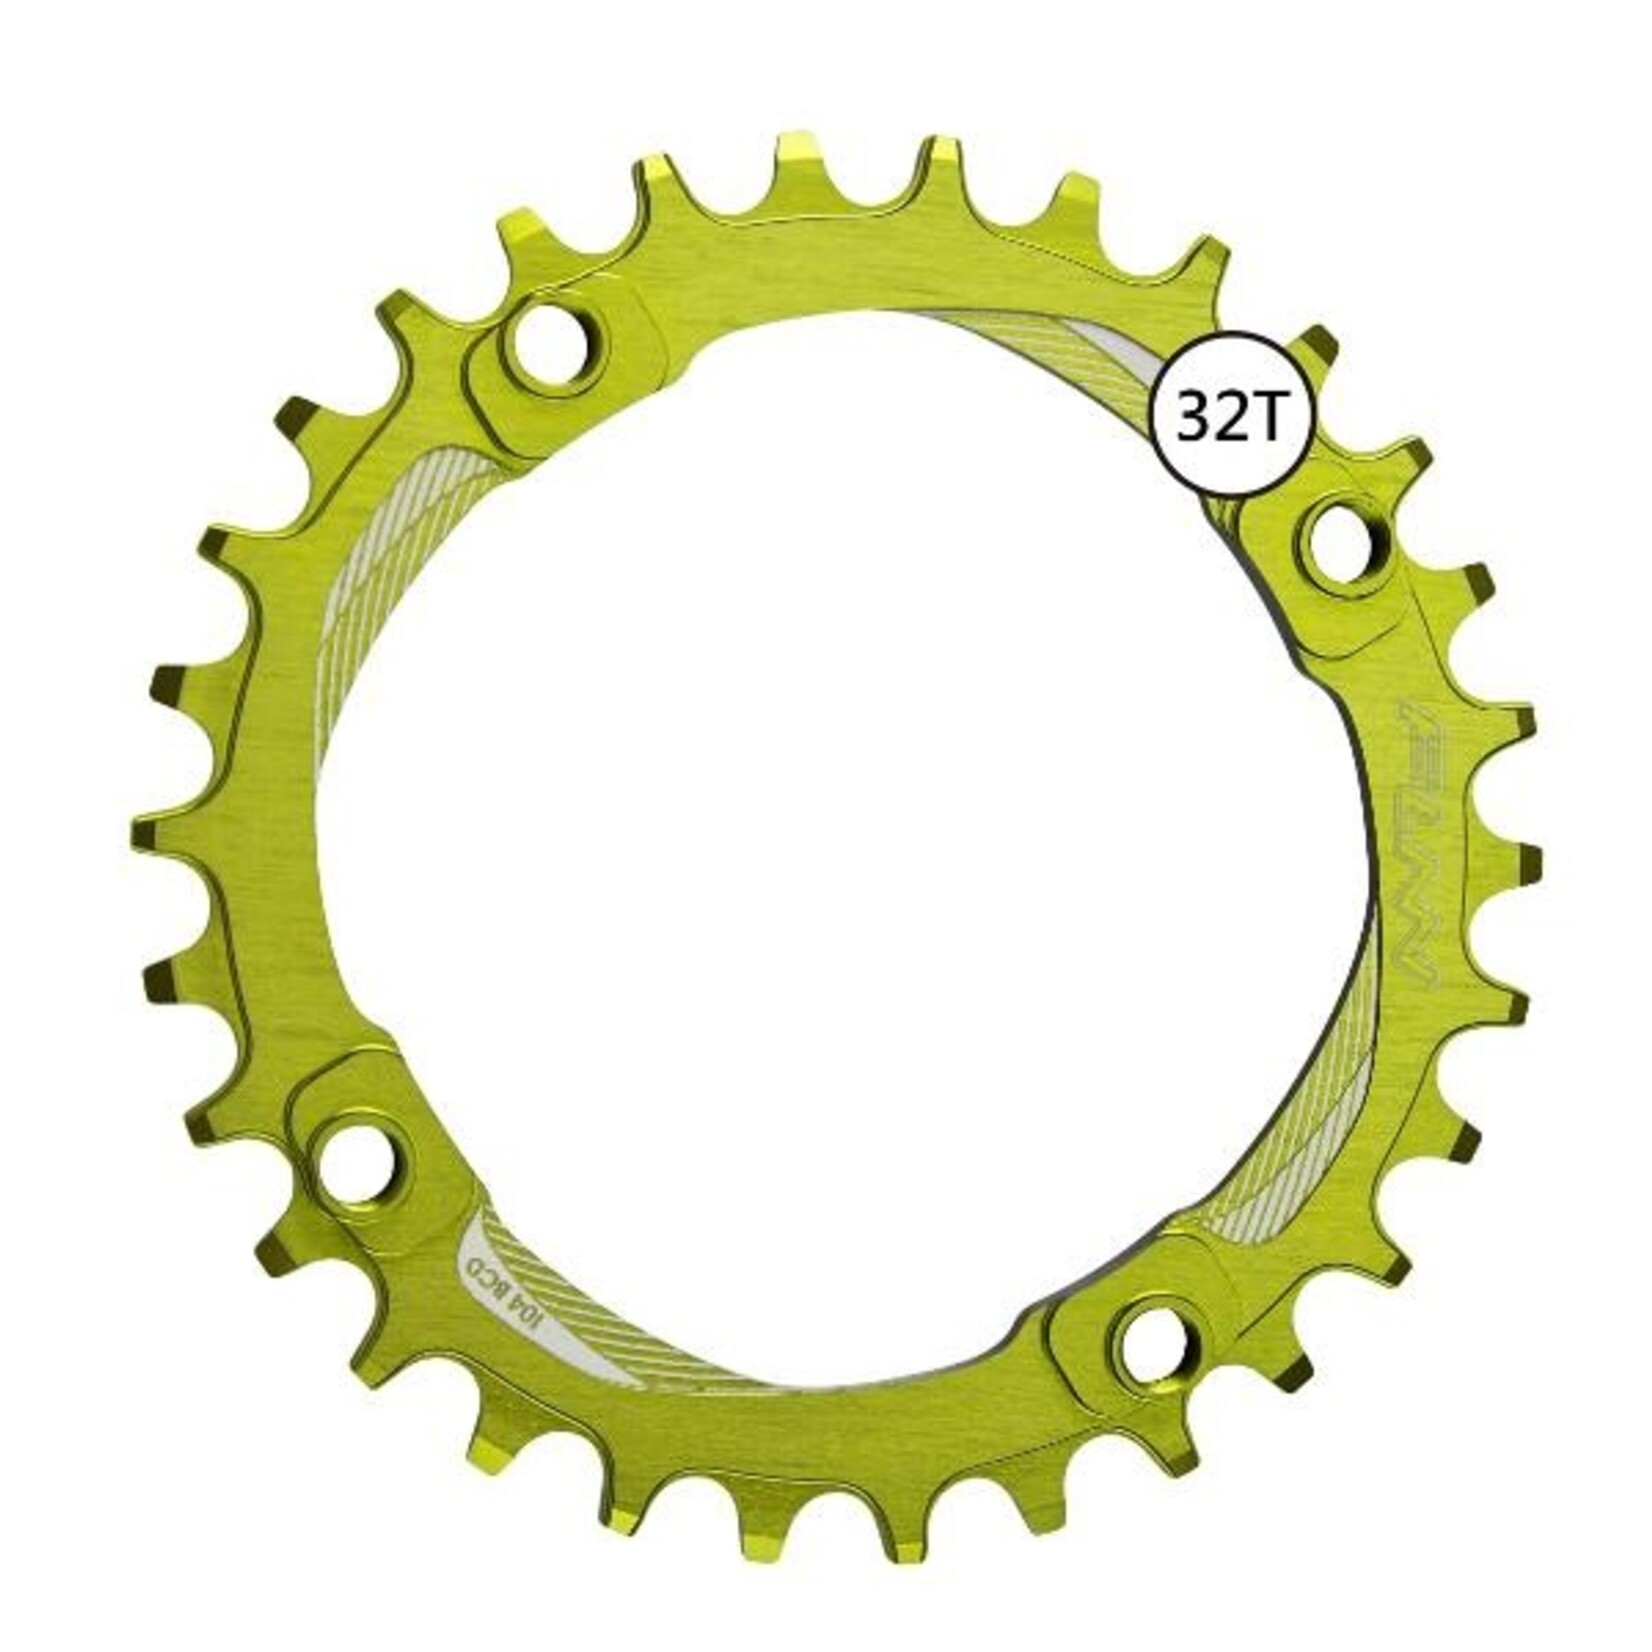 FUNN Funn Bicycle Chain Ring - Solo Narrow-Wide - 32T - 104mm BCD - Wasabi